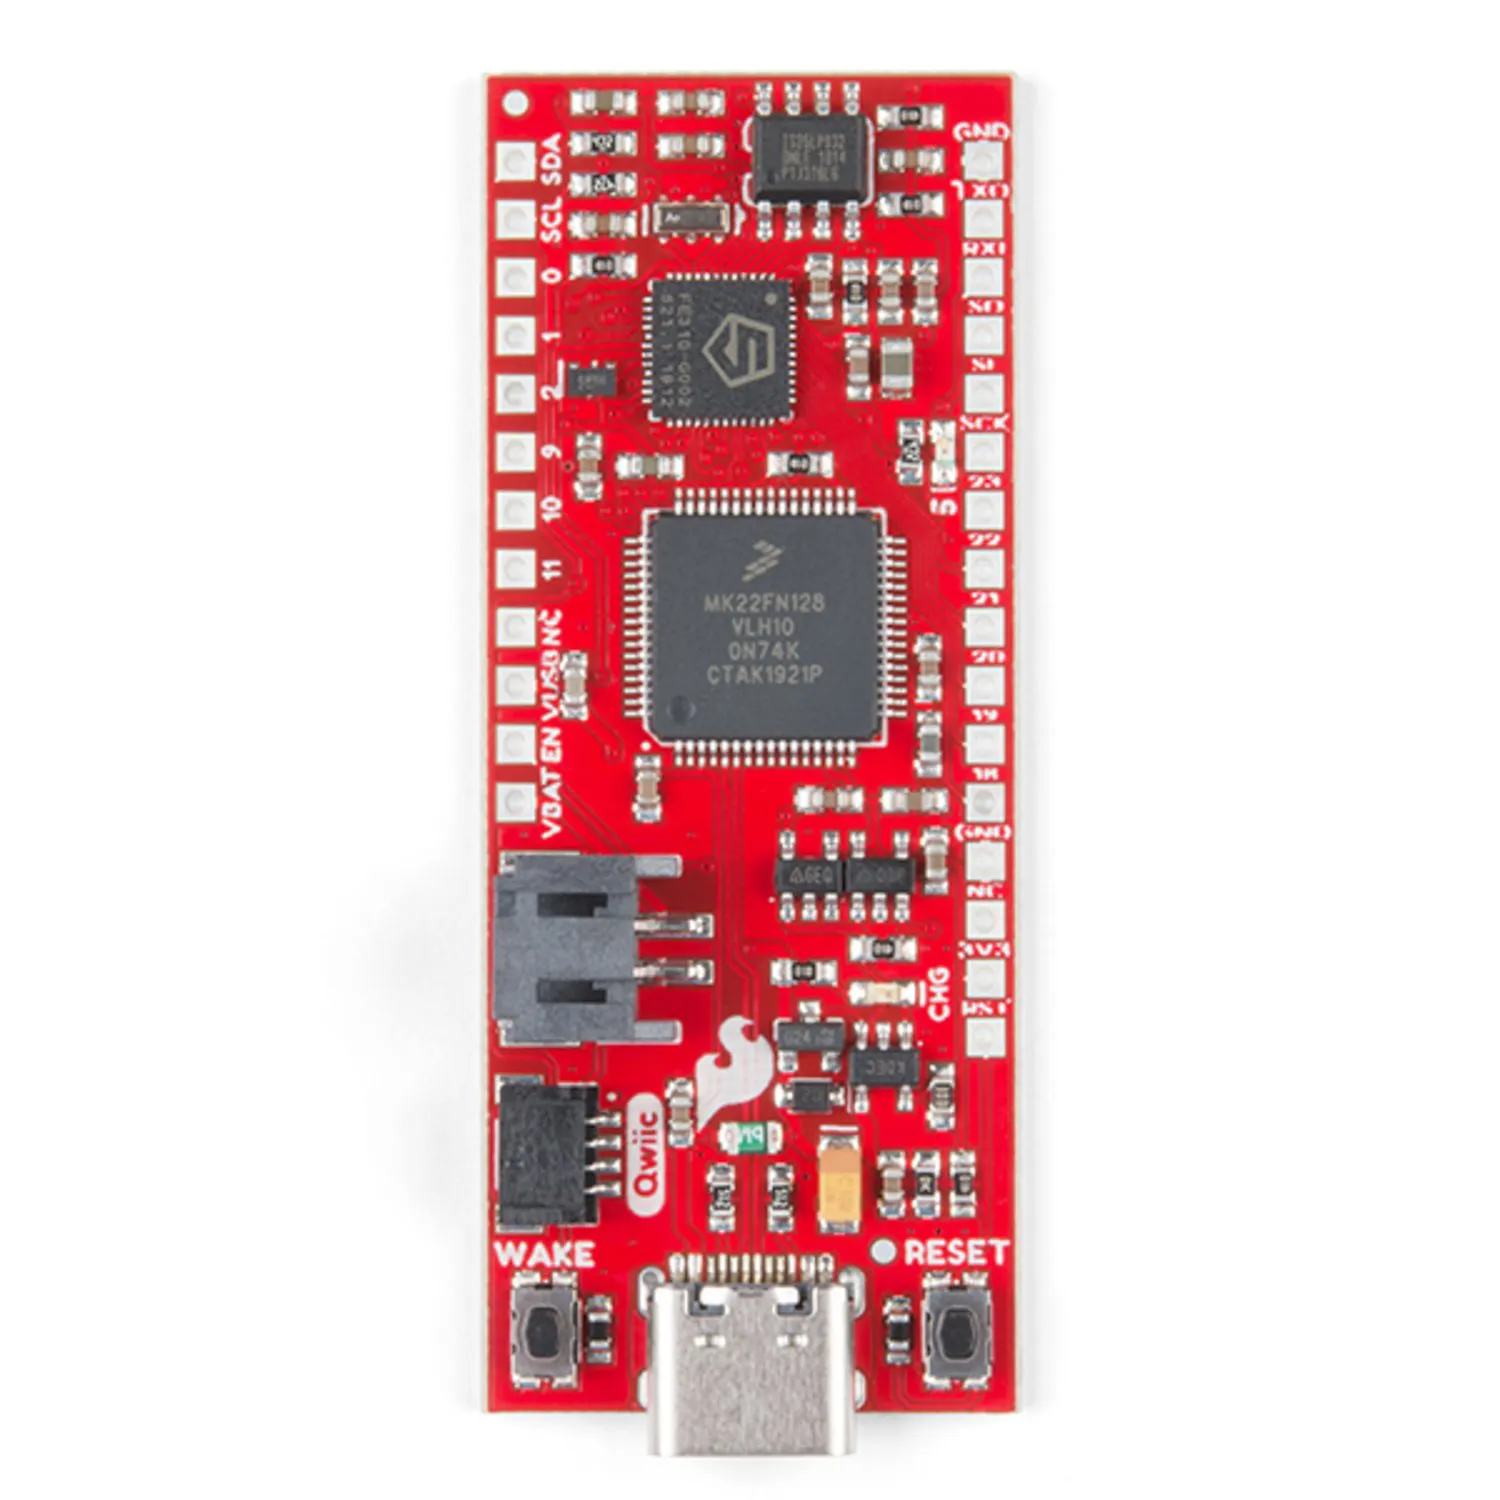 Photo of SparkFun RED-V Thing Plus - SiFive RISC-V FE310 SoC